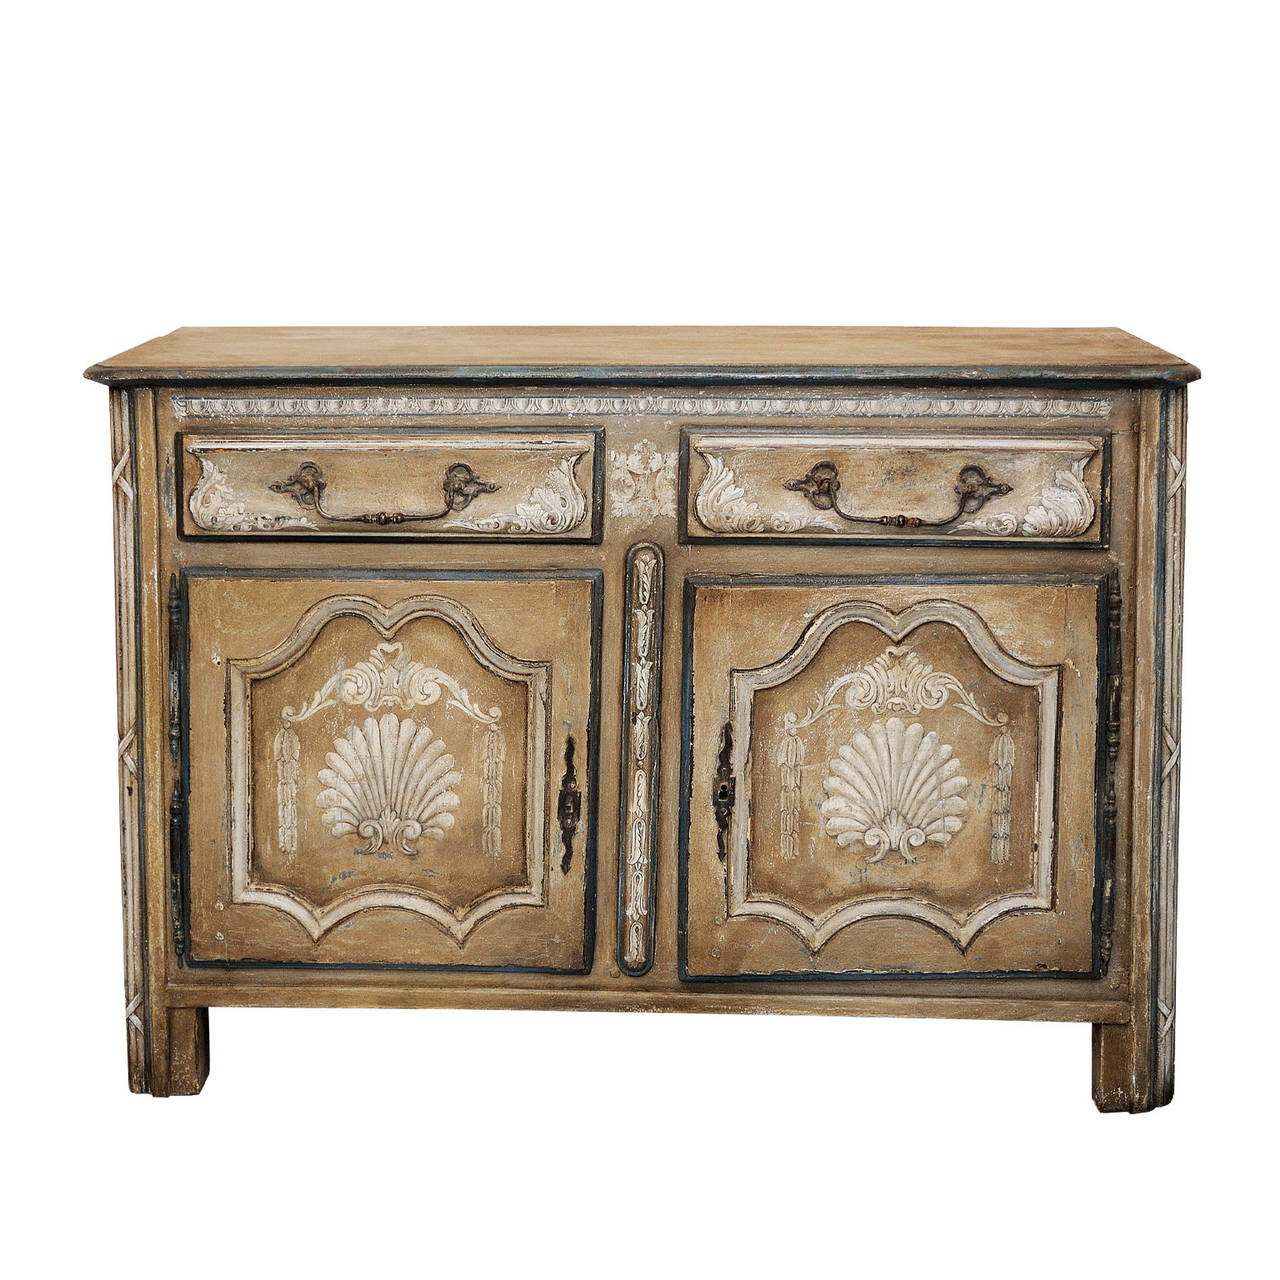 This is a very attractive French 18th century Louis XVI painted cupboard buffet (or server/sideboard) featuring lovely shell motif painted decoration with two drawers and decorated cupboard doors. Paintwork refreshed, circa 1780.